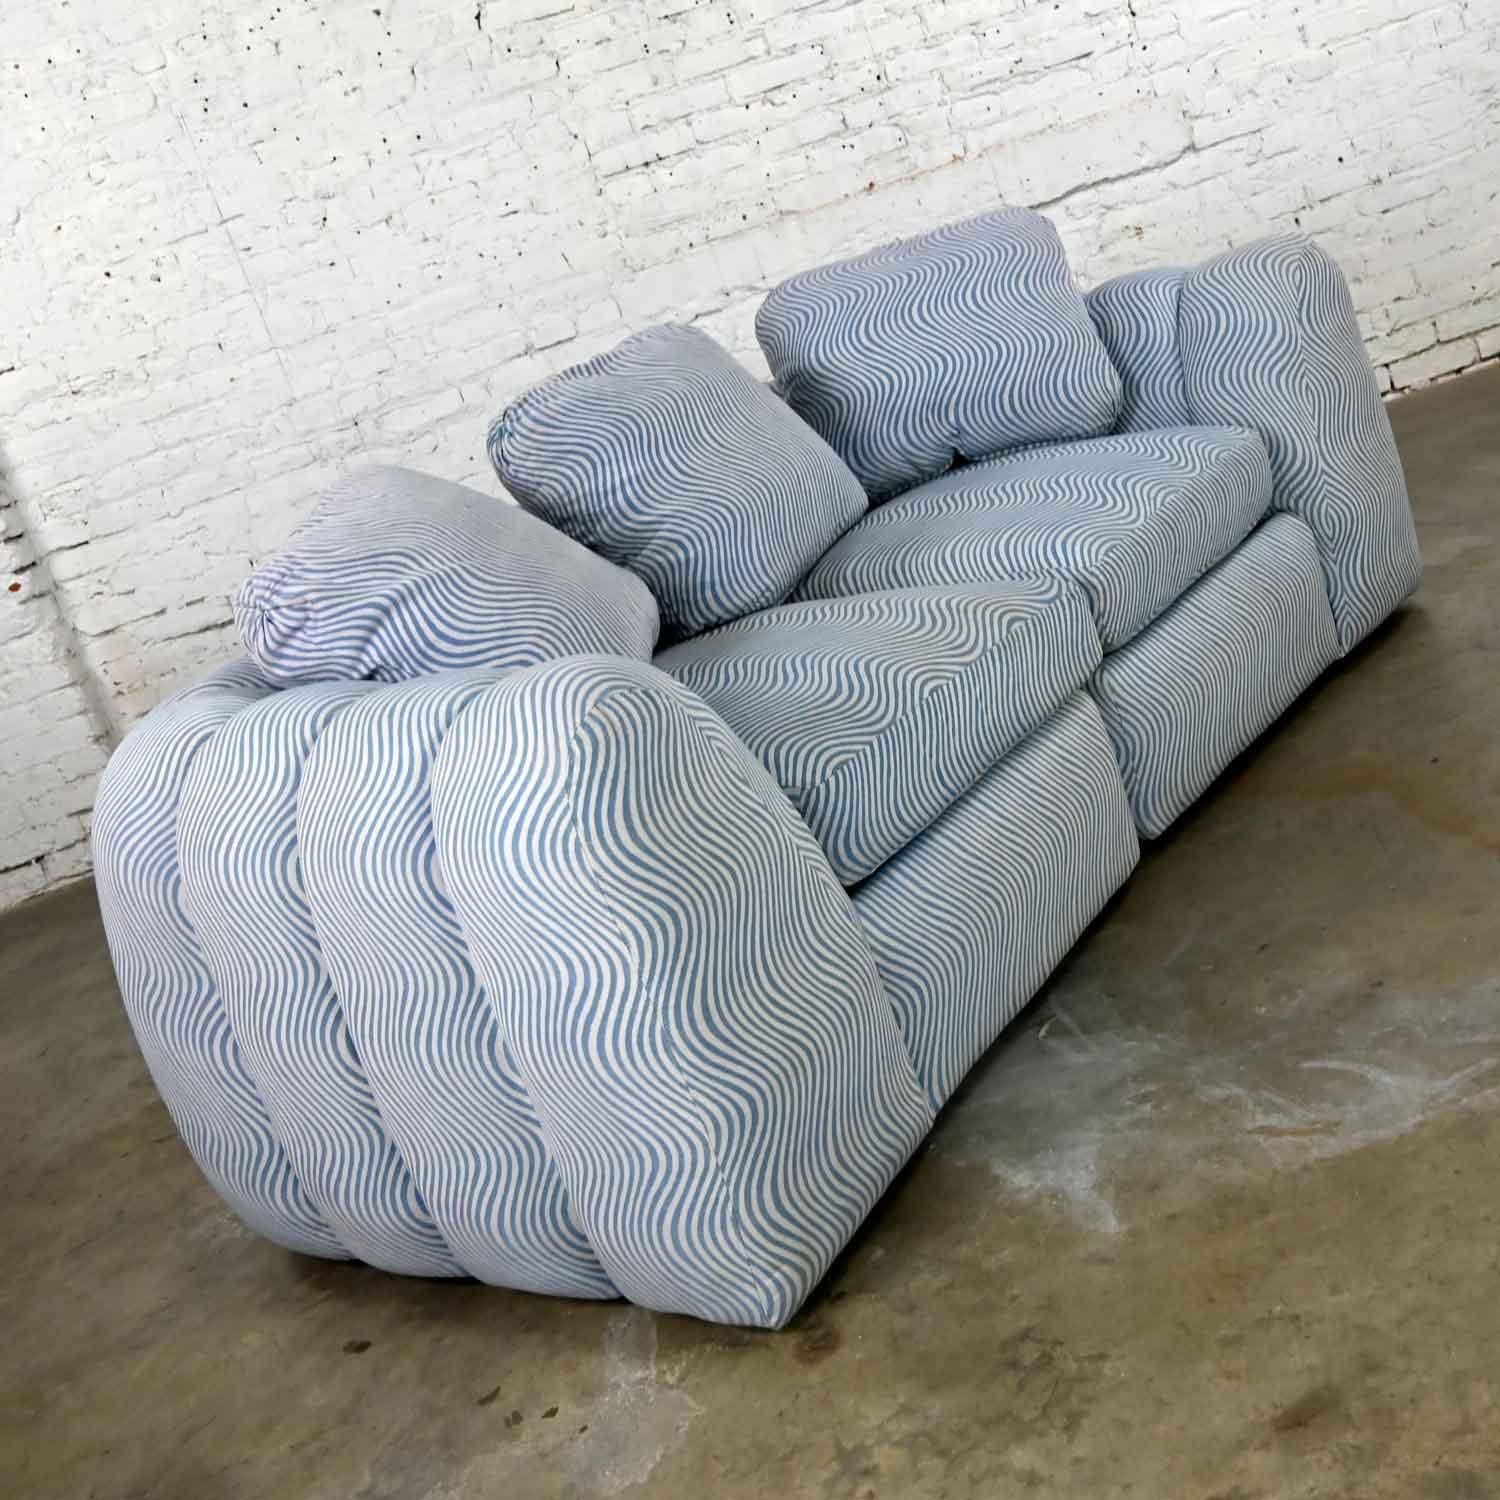 Modern Postmodern Channeled Sectional Loveseat Lounge Chairs Style Jay Spectre In Good Condition For Sale In Topeka, KS